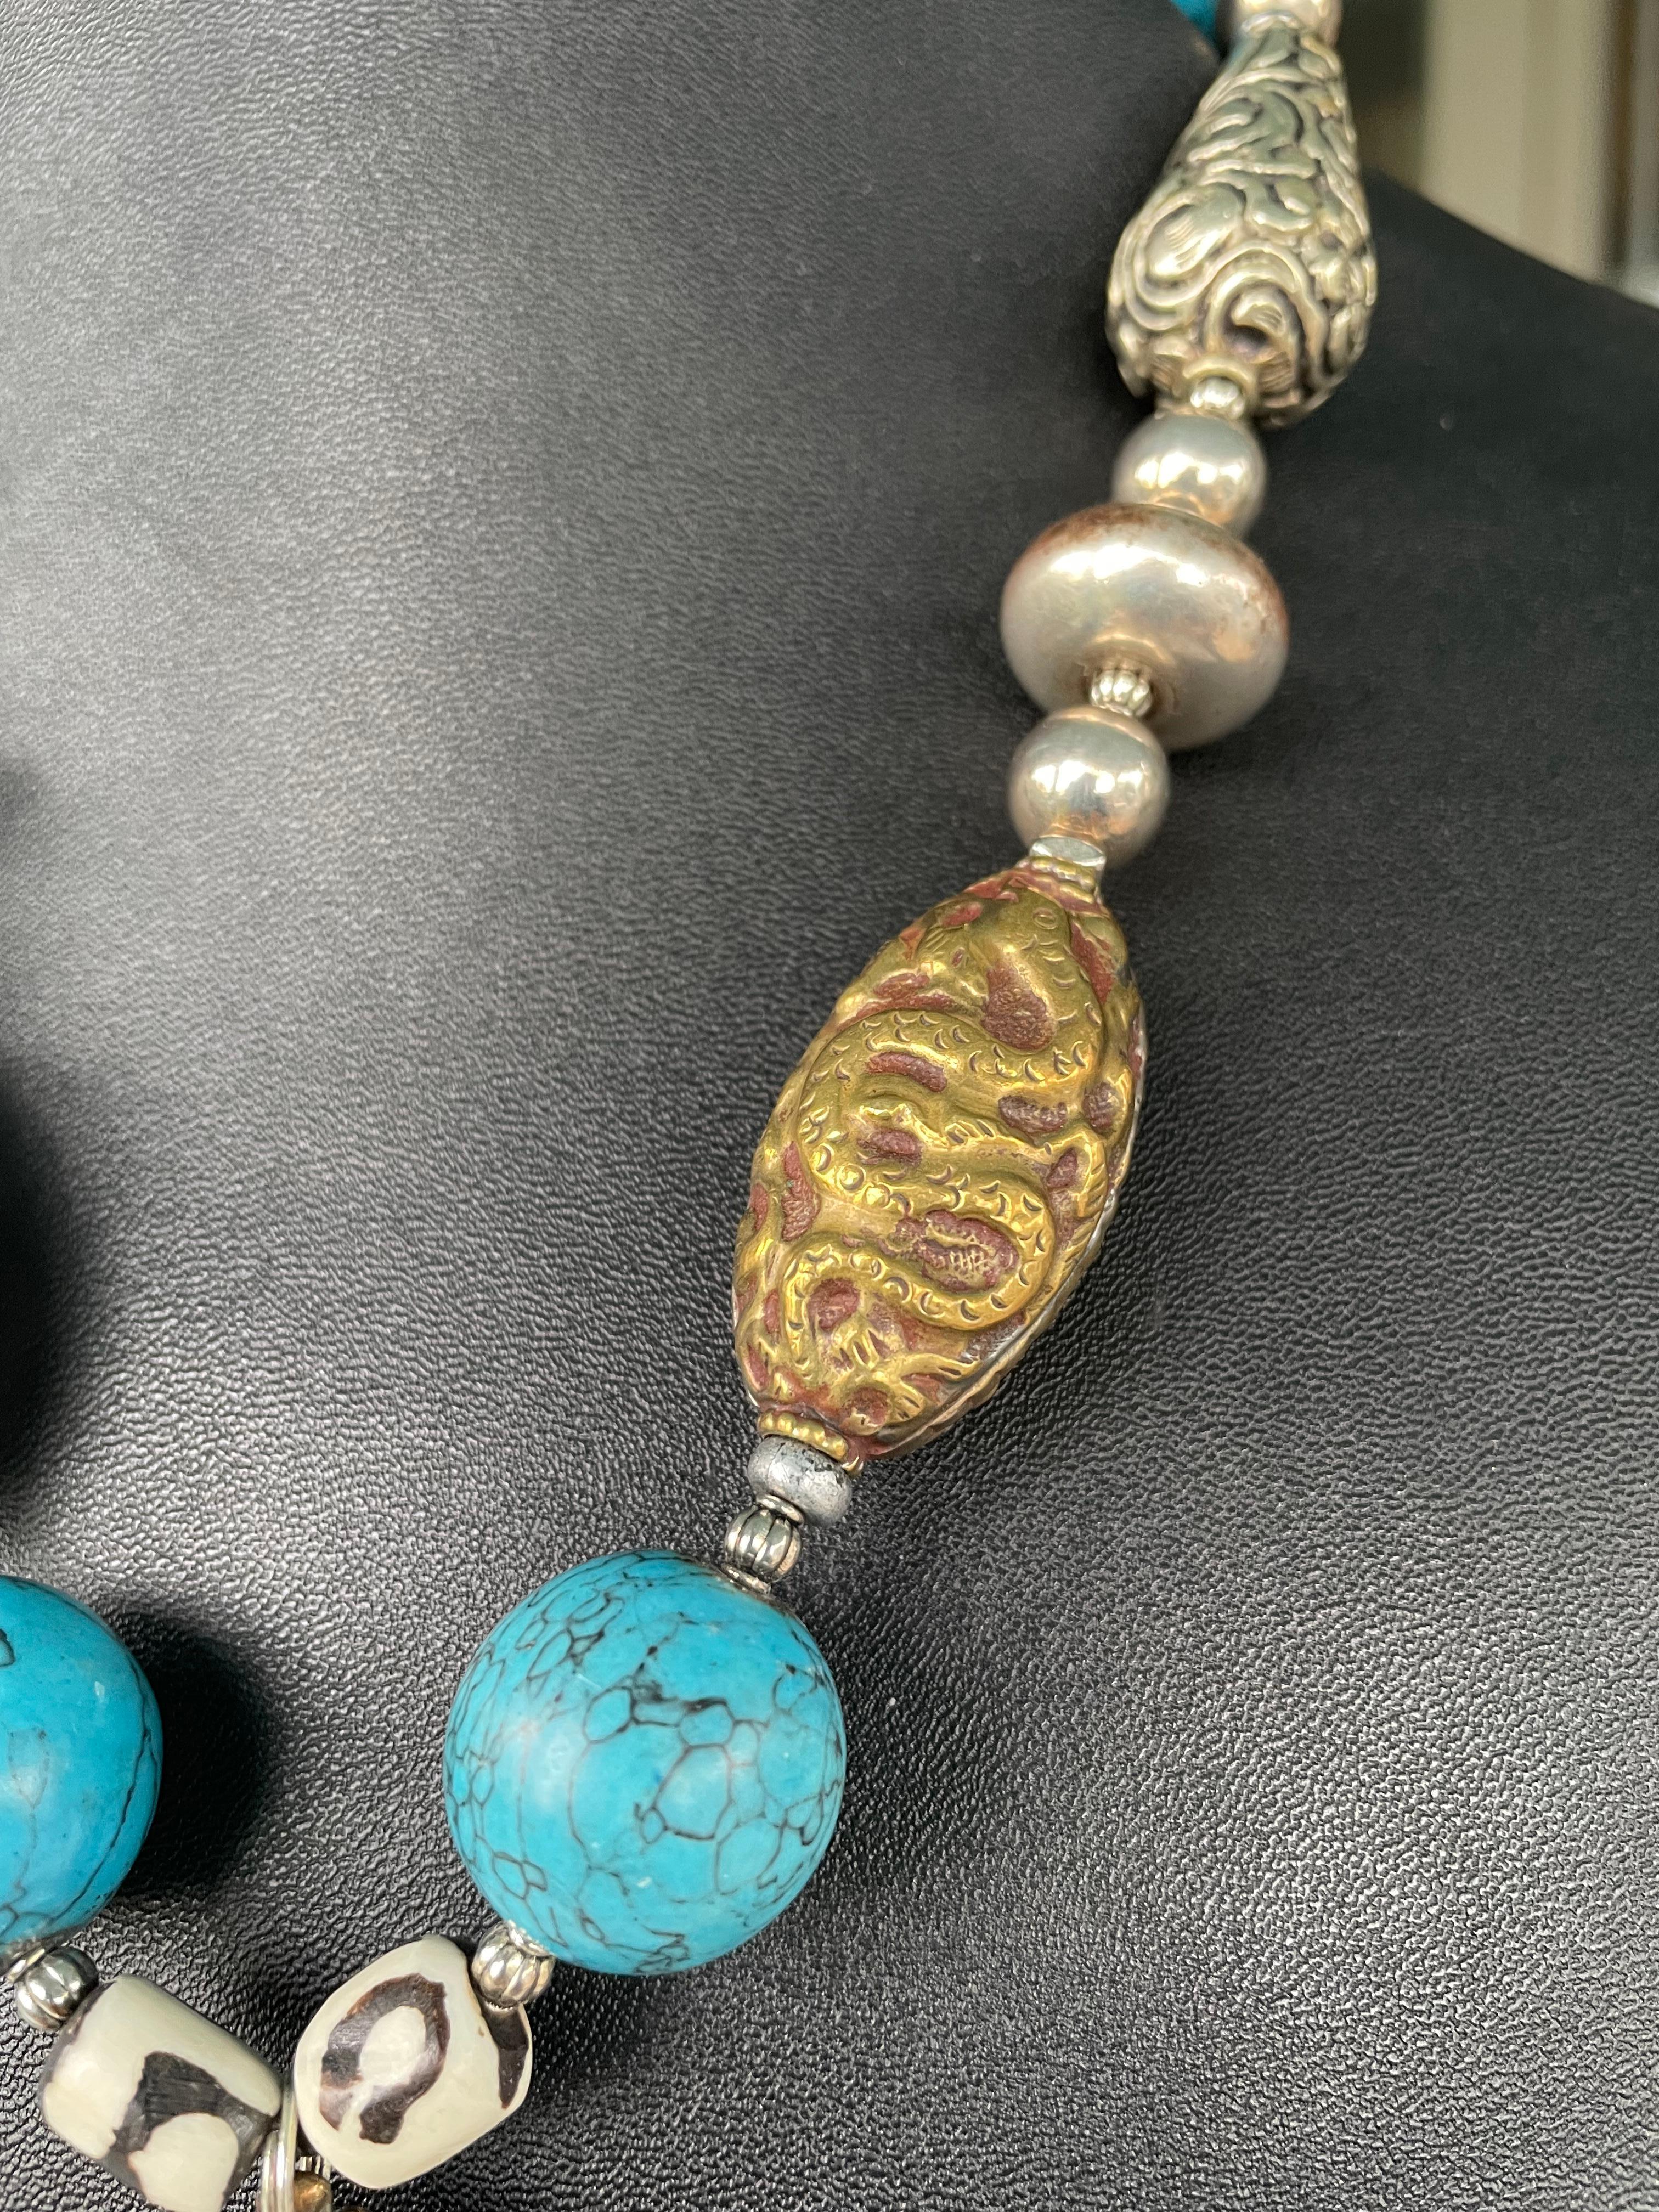 Bead One of a kind vintage sterling elephant pendant on turquoise, brass and sterling